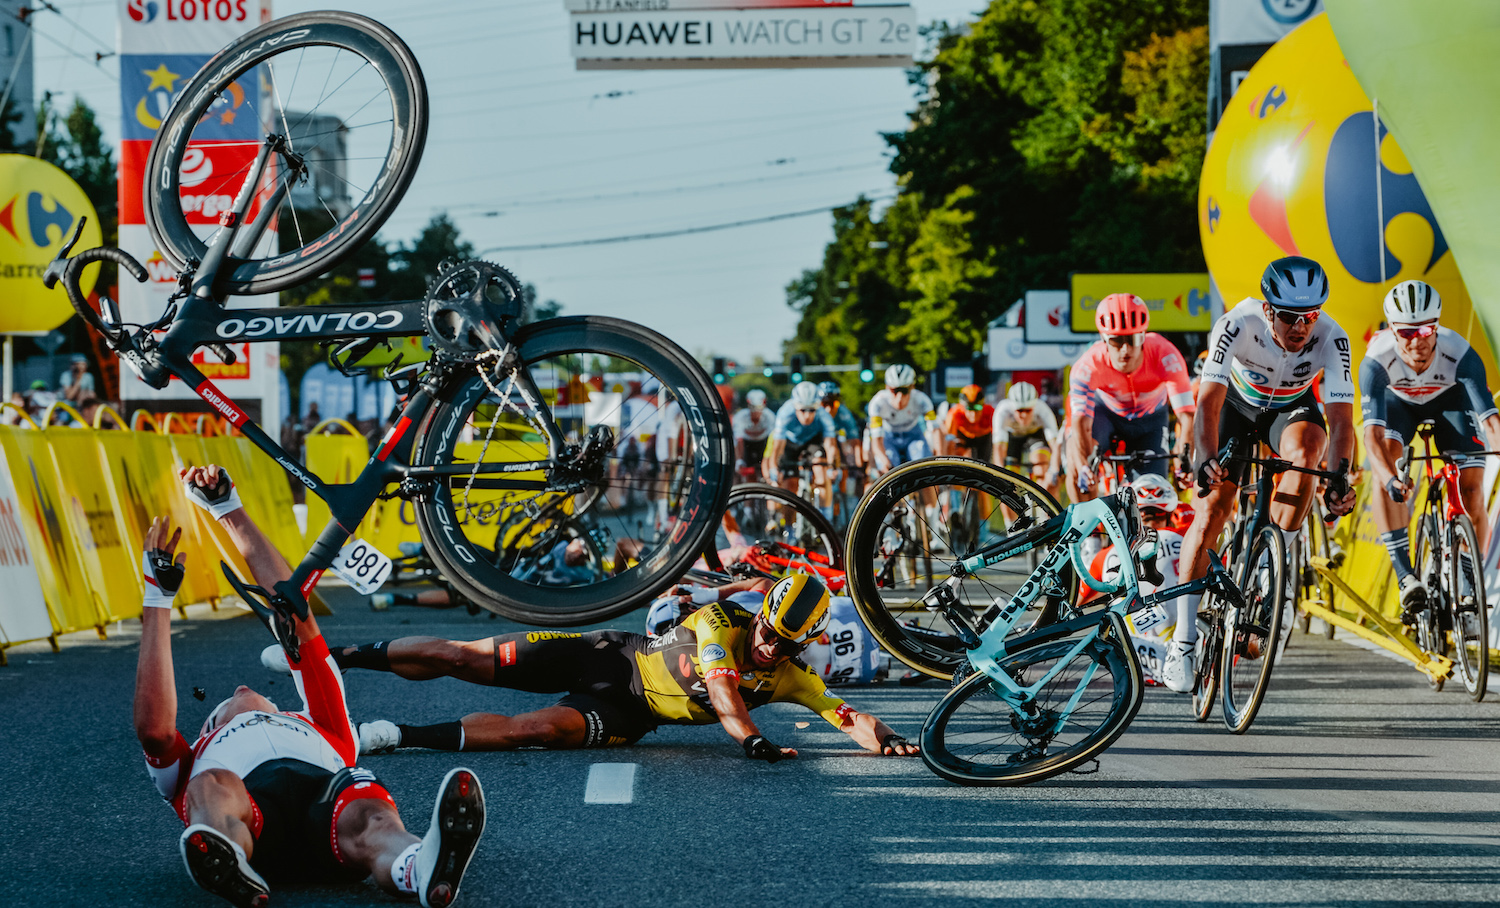 TOPSHOT - Dutch cyclist Dylan Groenewegen (on the ground ,C) and fellow riders collide during the opening stage of the Tour of Poland race in Katowice , southern Poland on August 5, 2020. - Dutch rider Fabio Jakobsen was fighting for his life on Wednesday after he was thrown into and over a barrier at 80km/h in a sickening conclusion to the opening stage of the Tour of Poland. (Photo by Szymon Gruchalski / Forum / AFP) (Photo by SZYMON GRUCHALSKI/Forum/AFP via Getty Images)